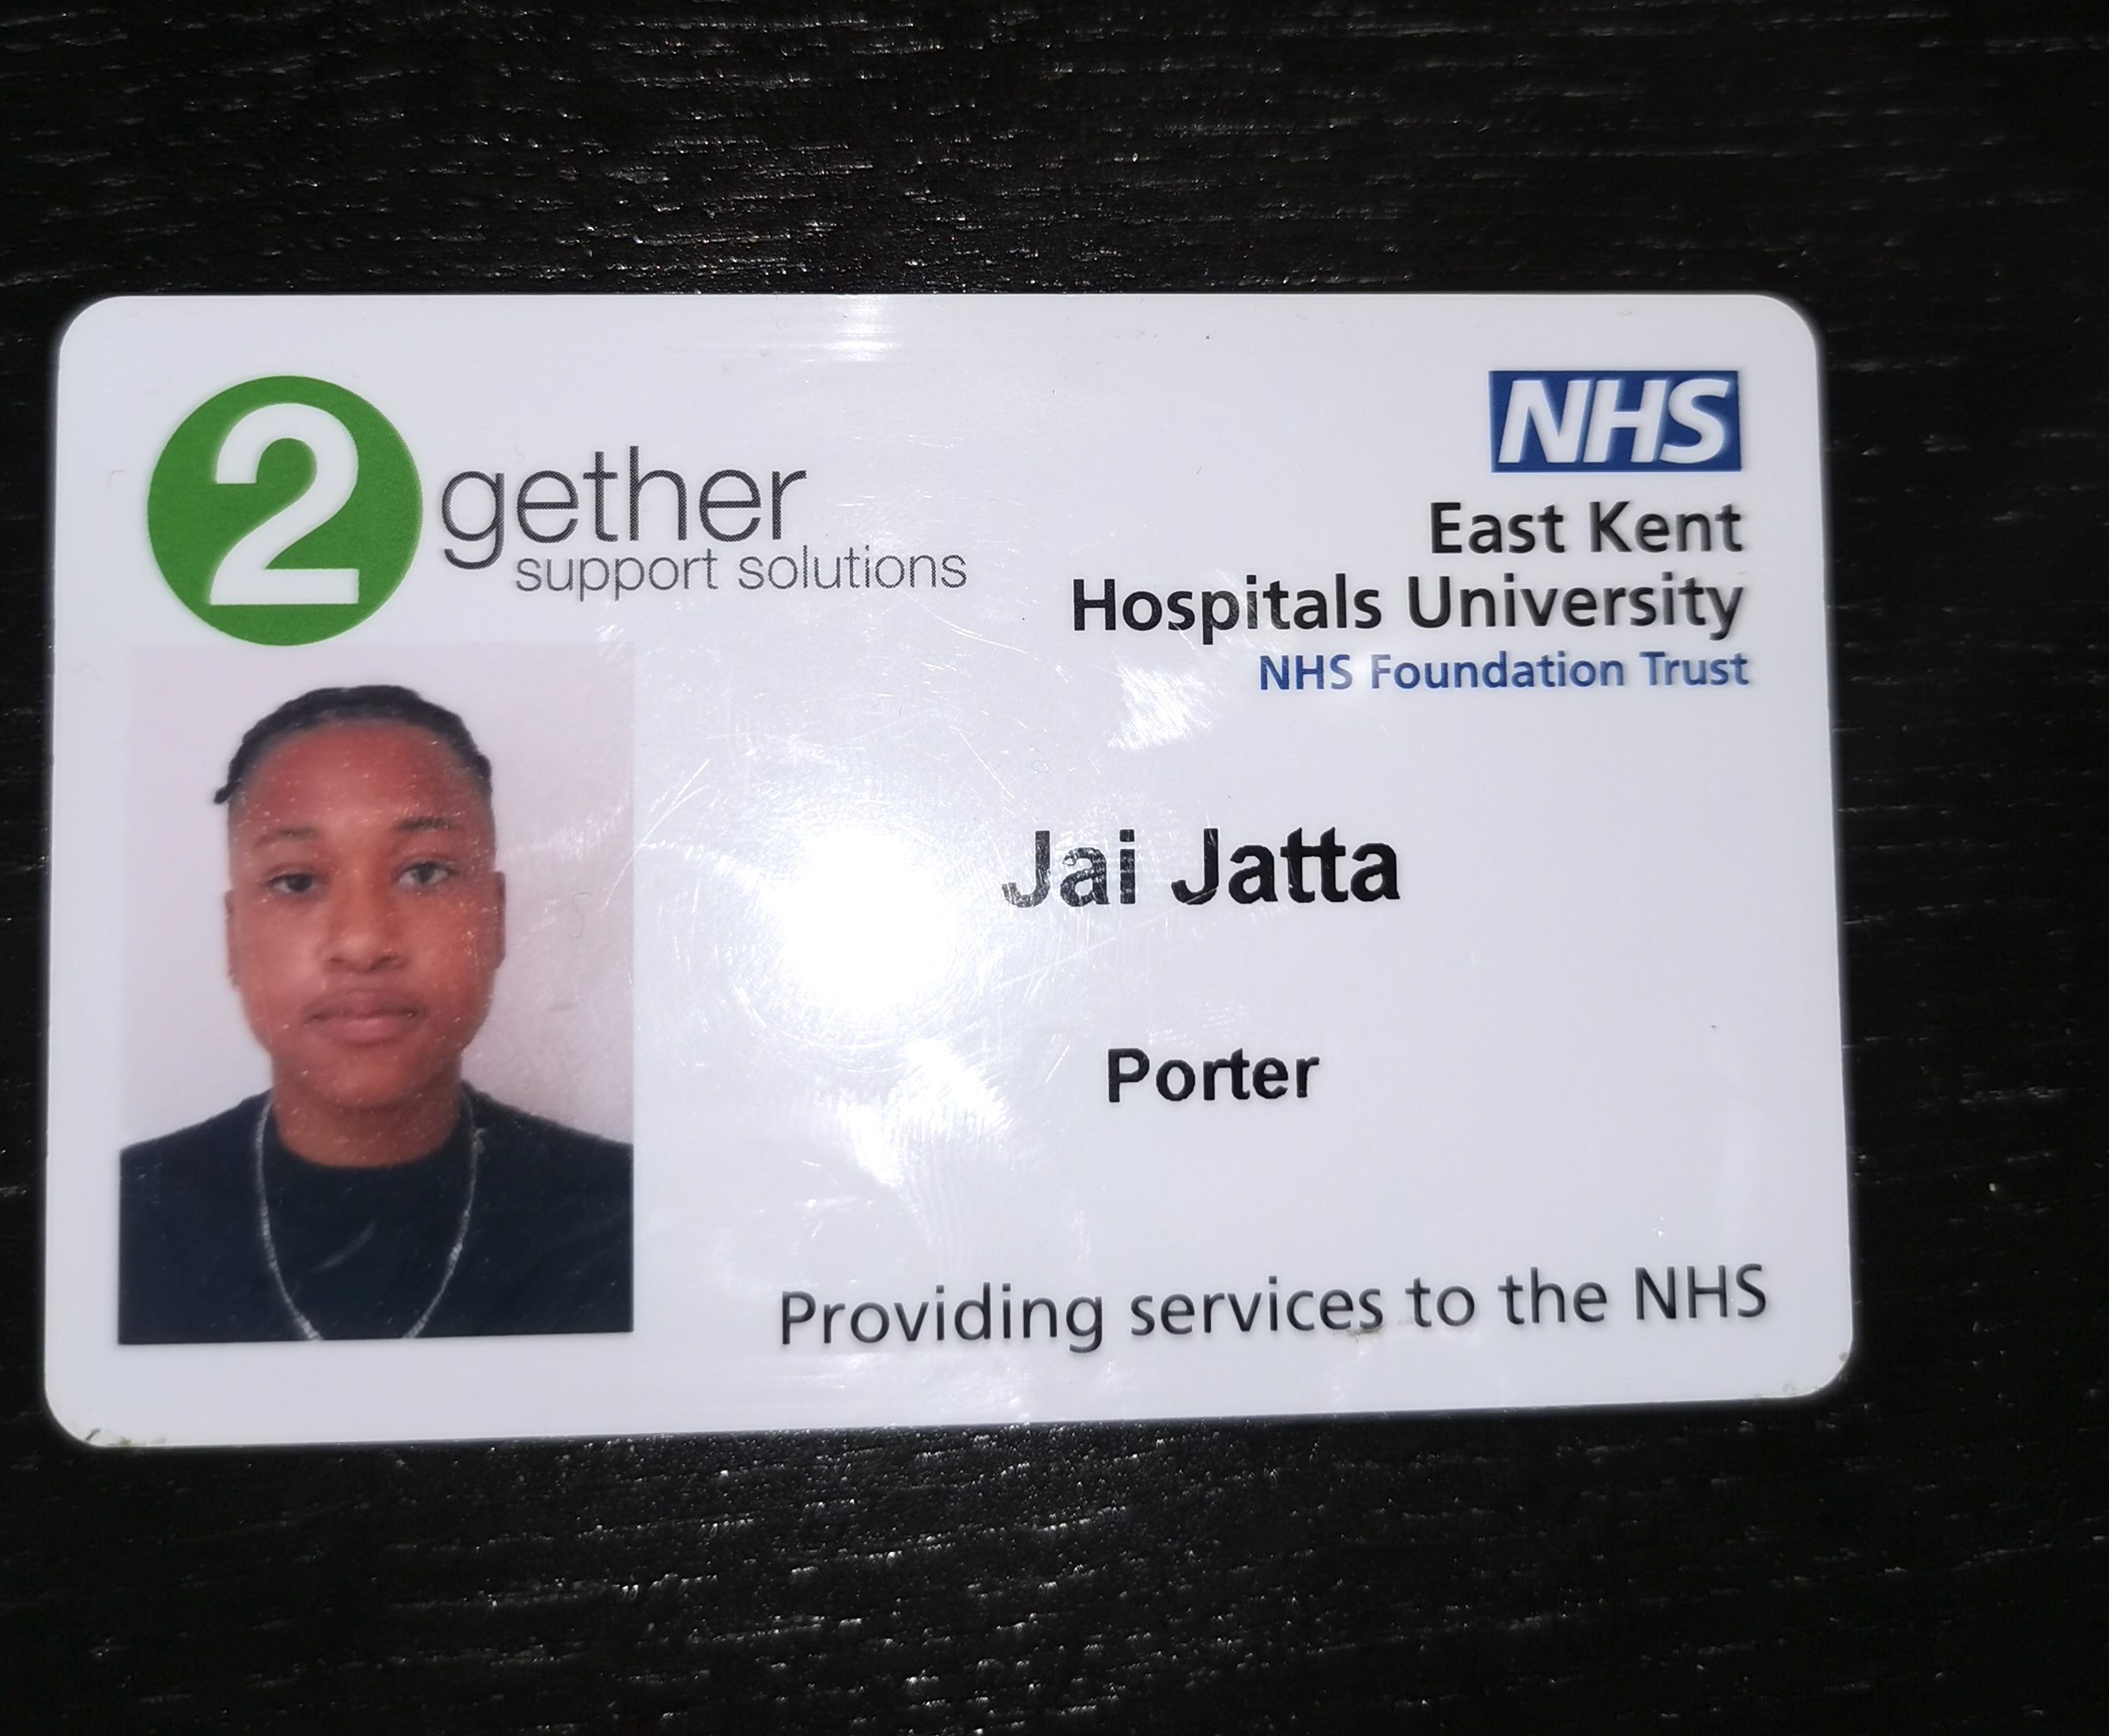 NHS identification card